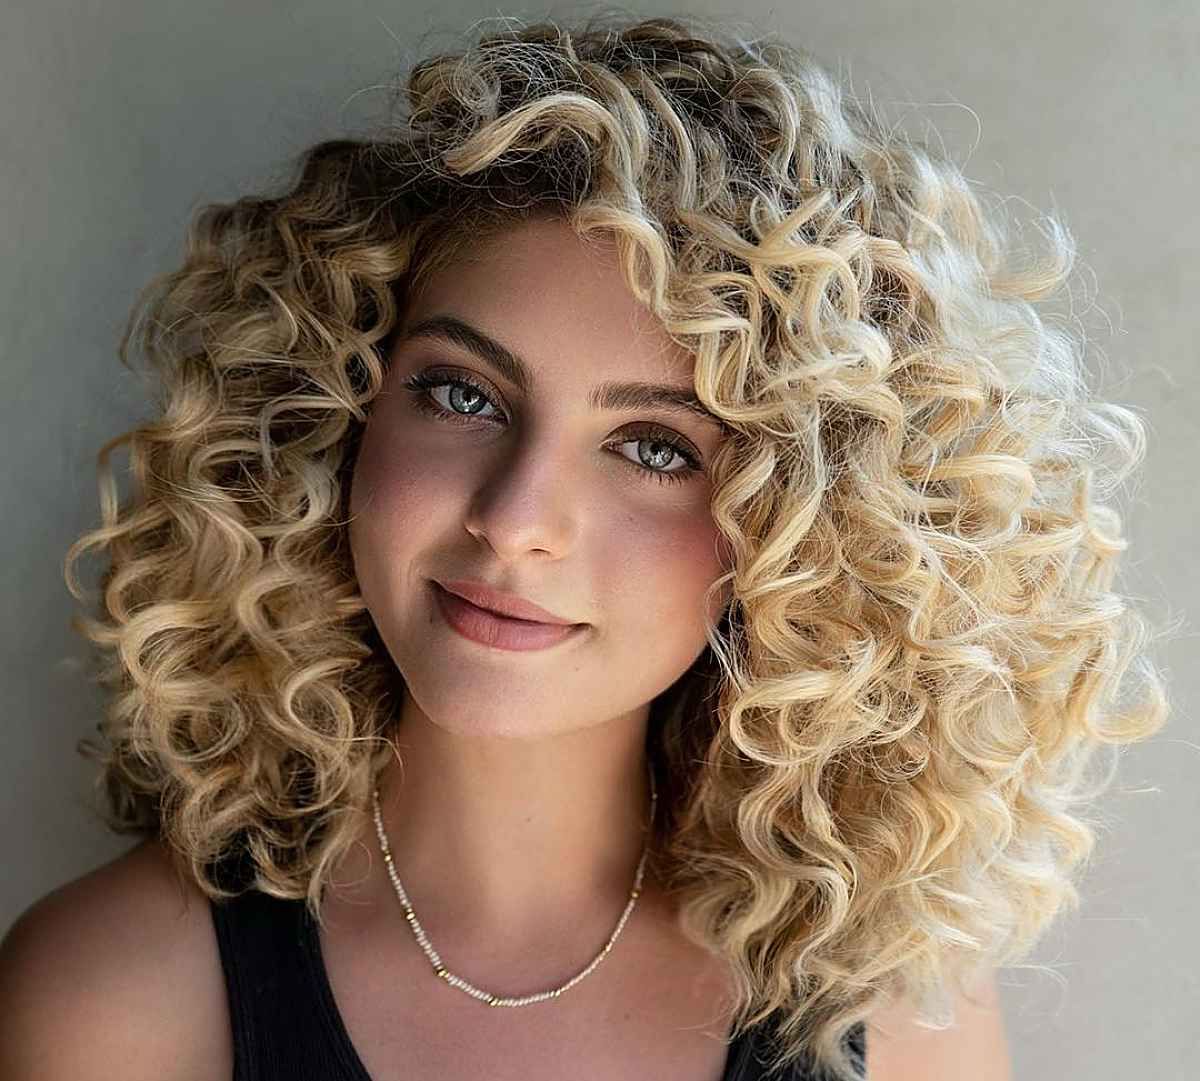 62 Best Shoulder Length Curly Hair Cuts & Styles In 2022 Intended For Most Up To Date Medium Length Curly Haircuts (View 11 of 25)